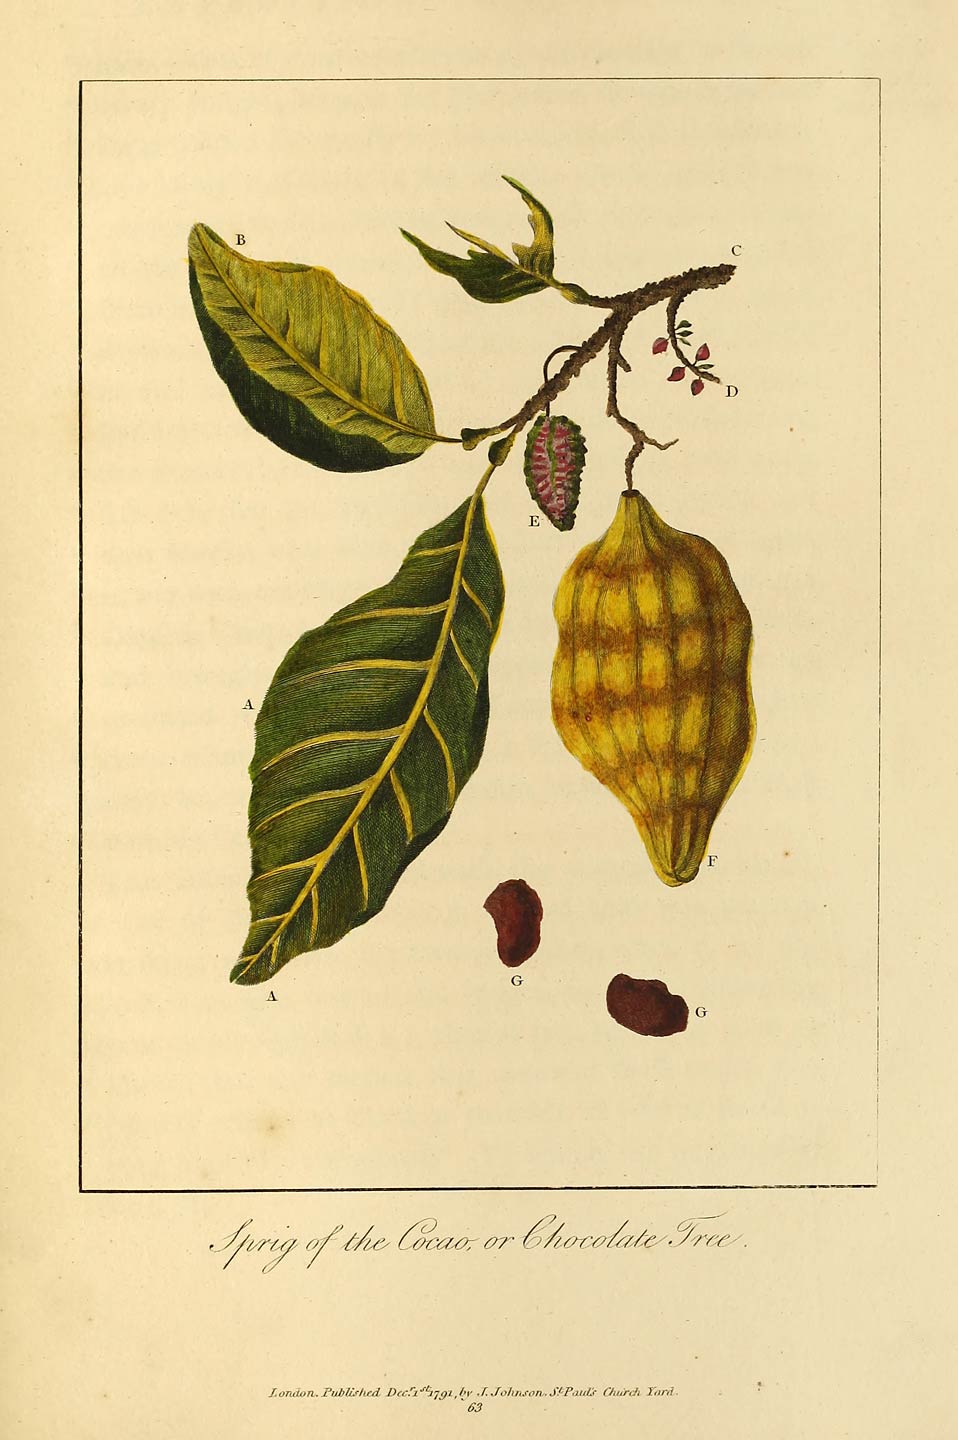 Sprig of the Cocao, or Chocolate Tree.